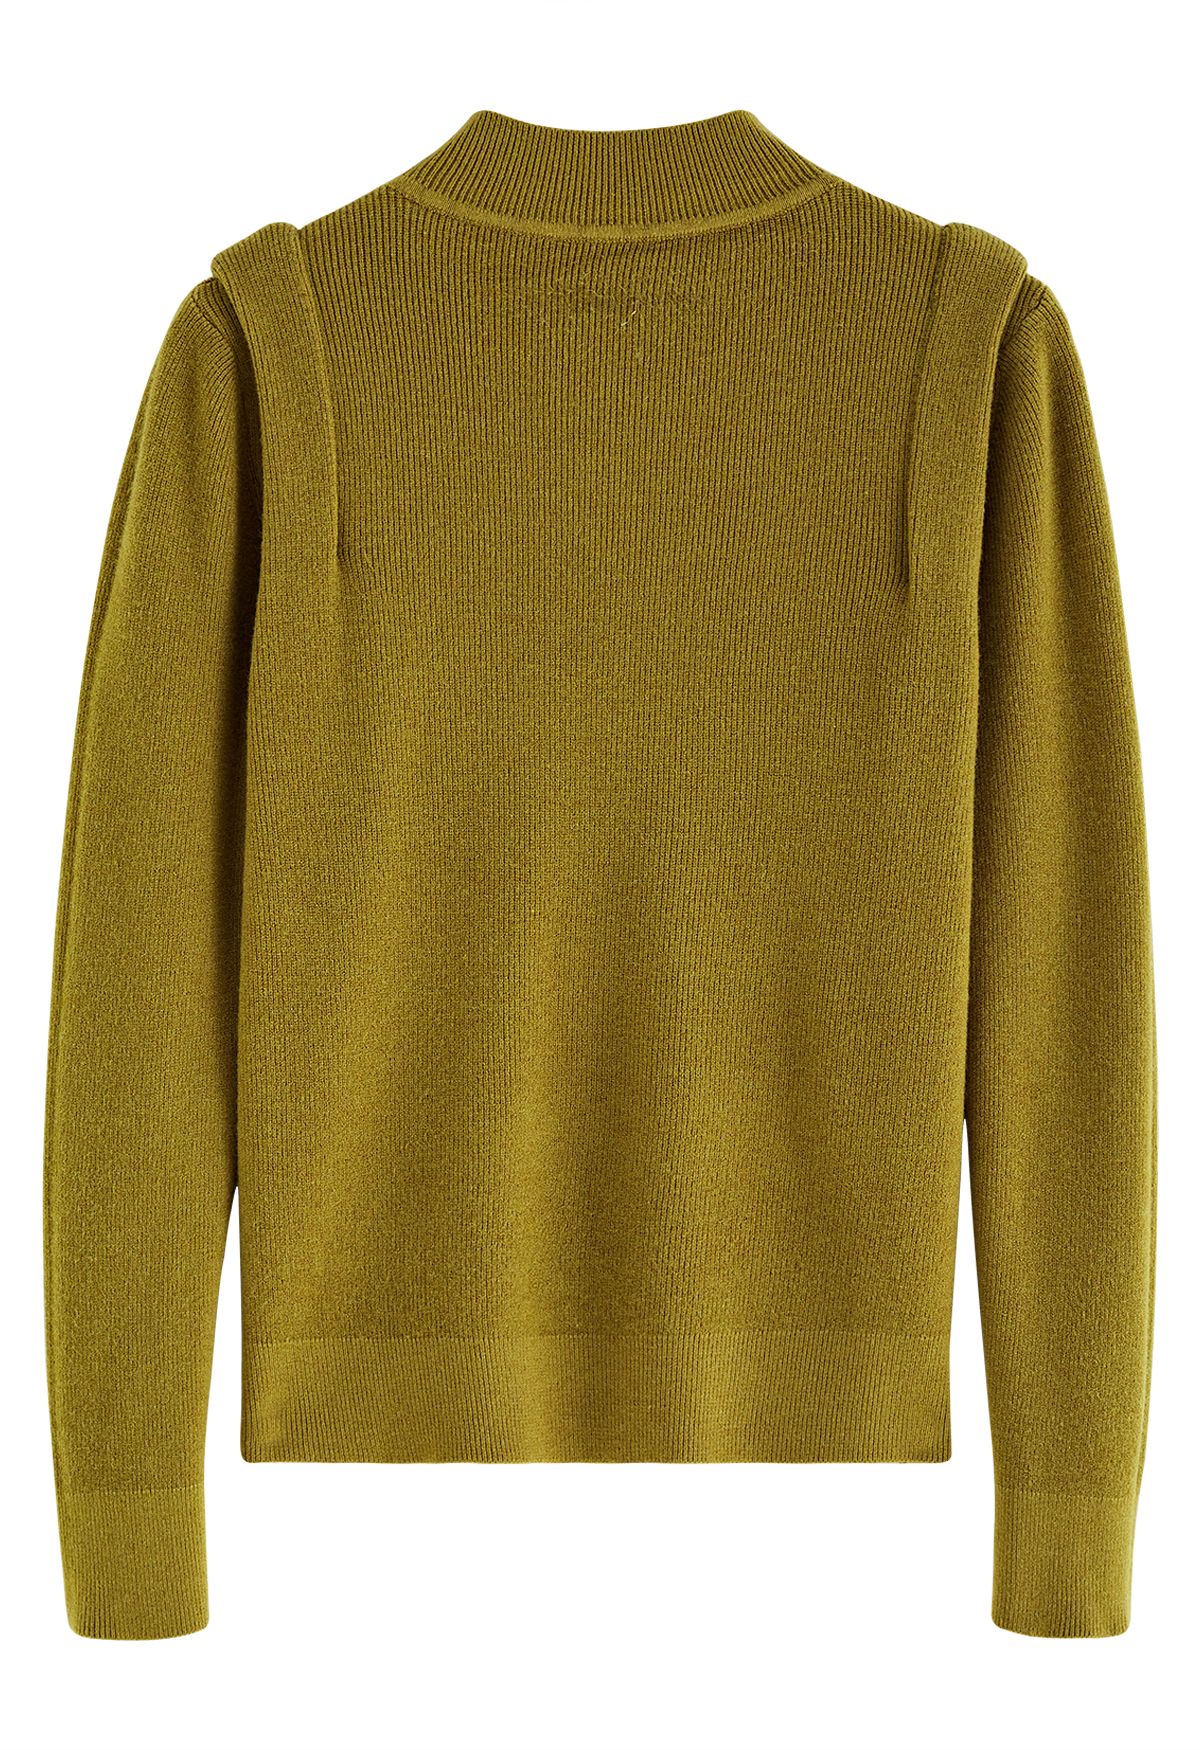 Buttons Embellished Mock Neck Knit Top in Moss Green